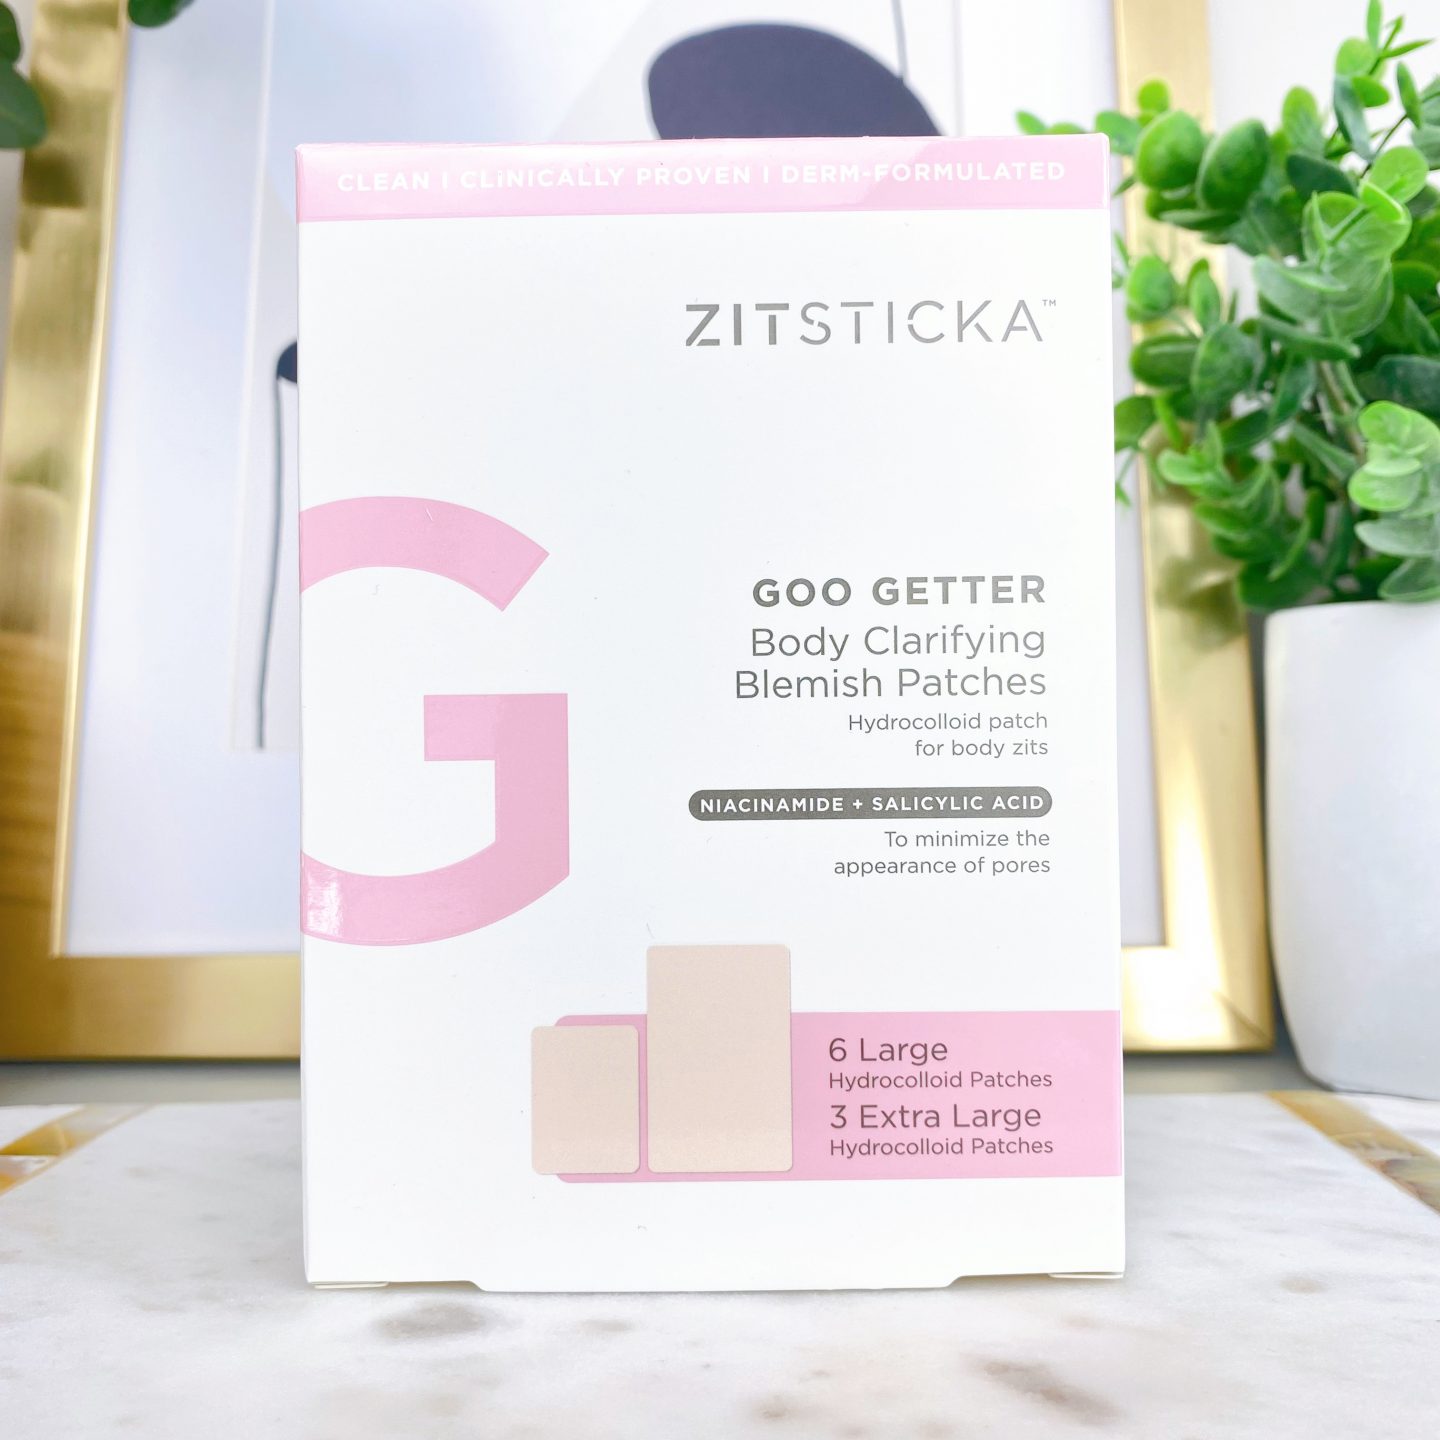 Zitsticka Goo Getter Body Clarifying Blemish Patches